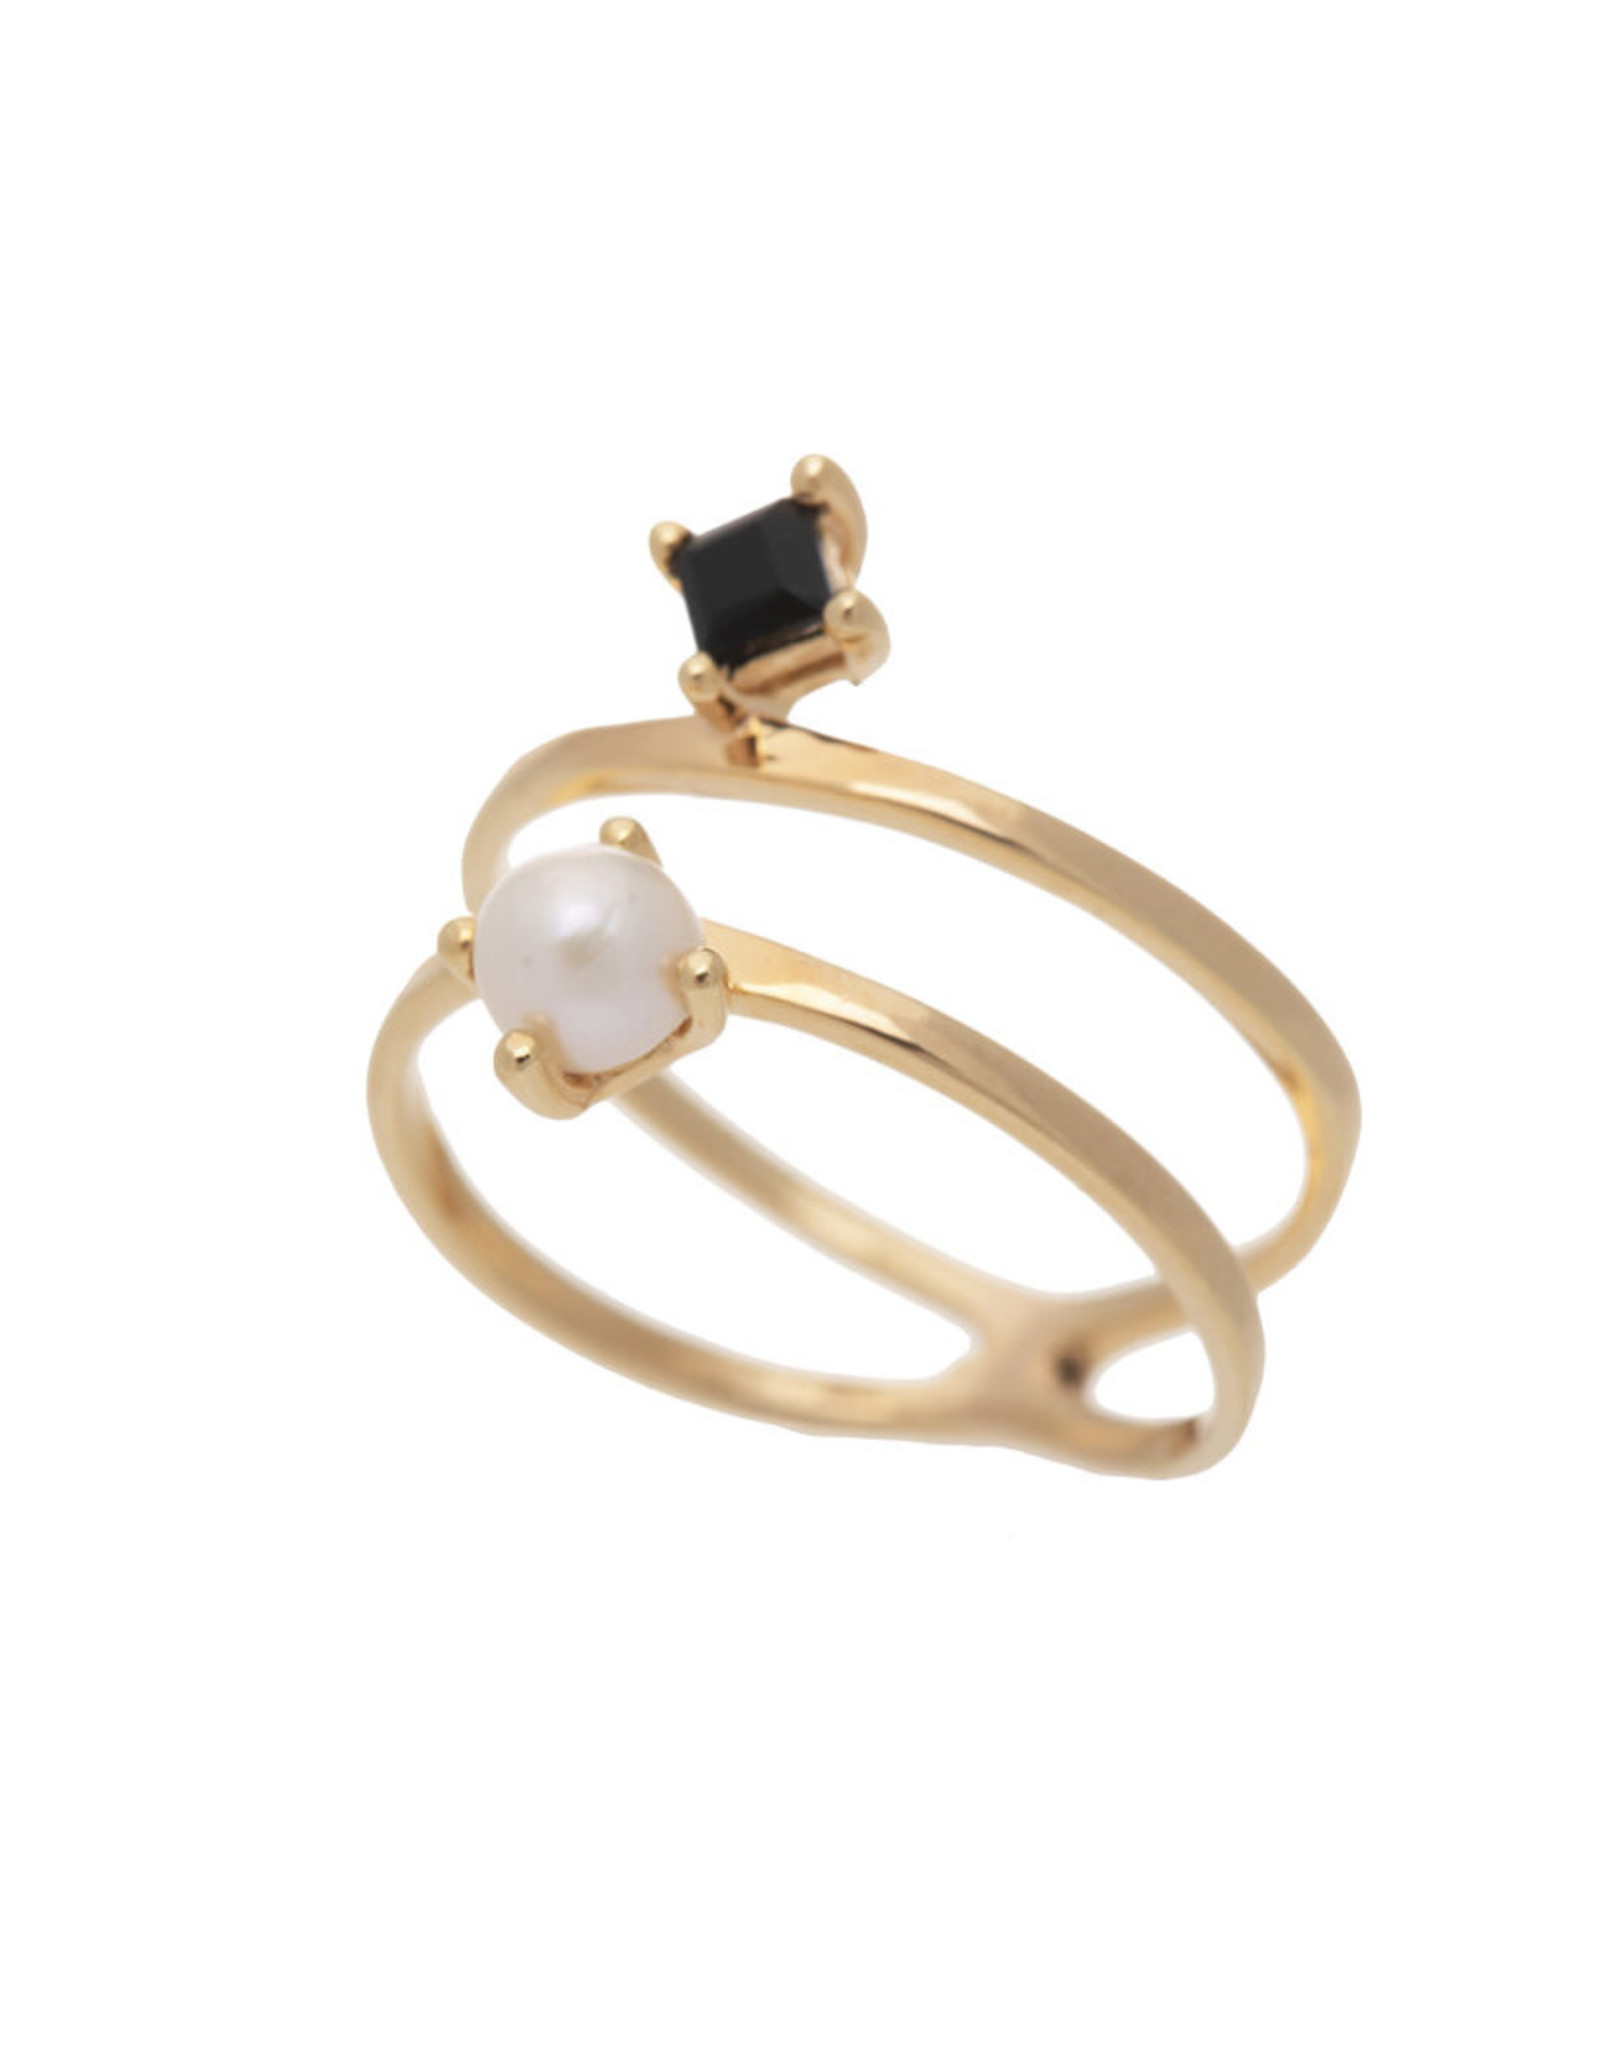 Sarah Mulder Jewelry Gold Cassie Ring - Onyx + Pearl - 5